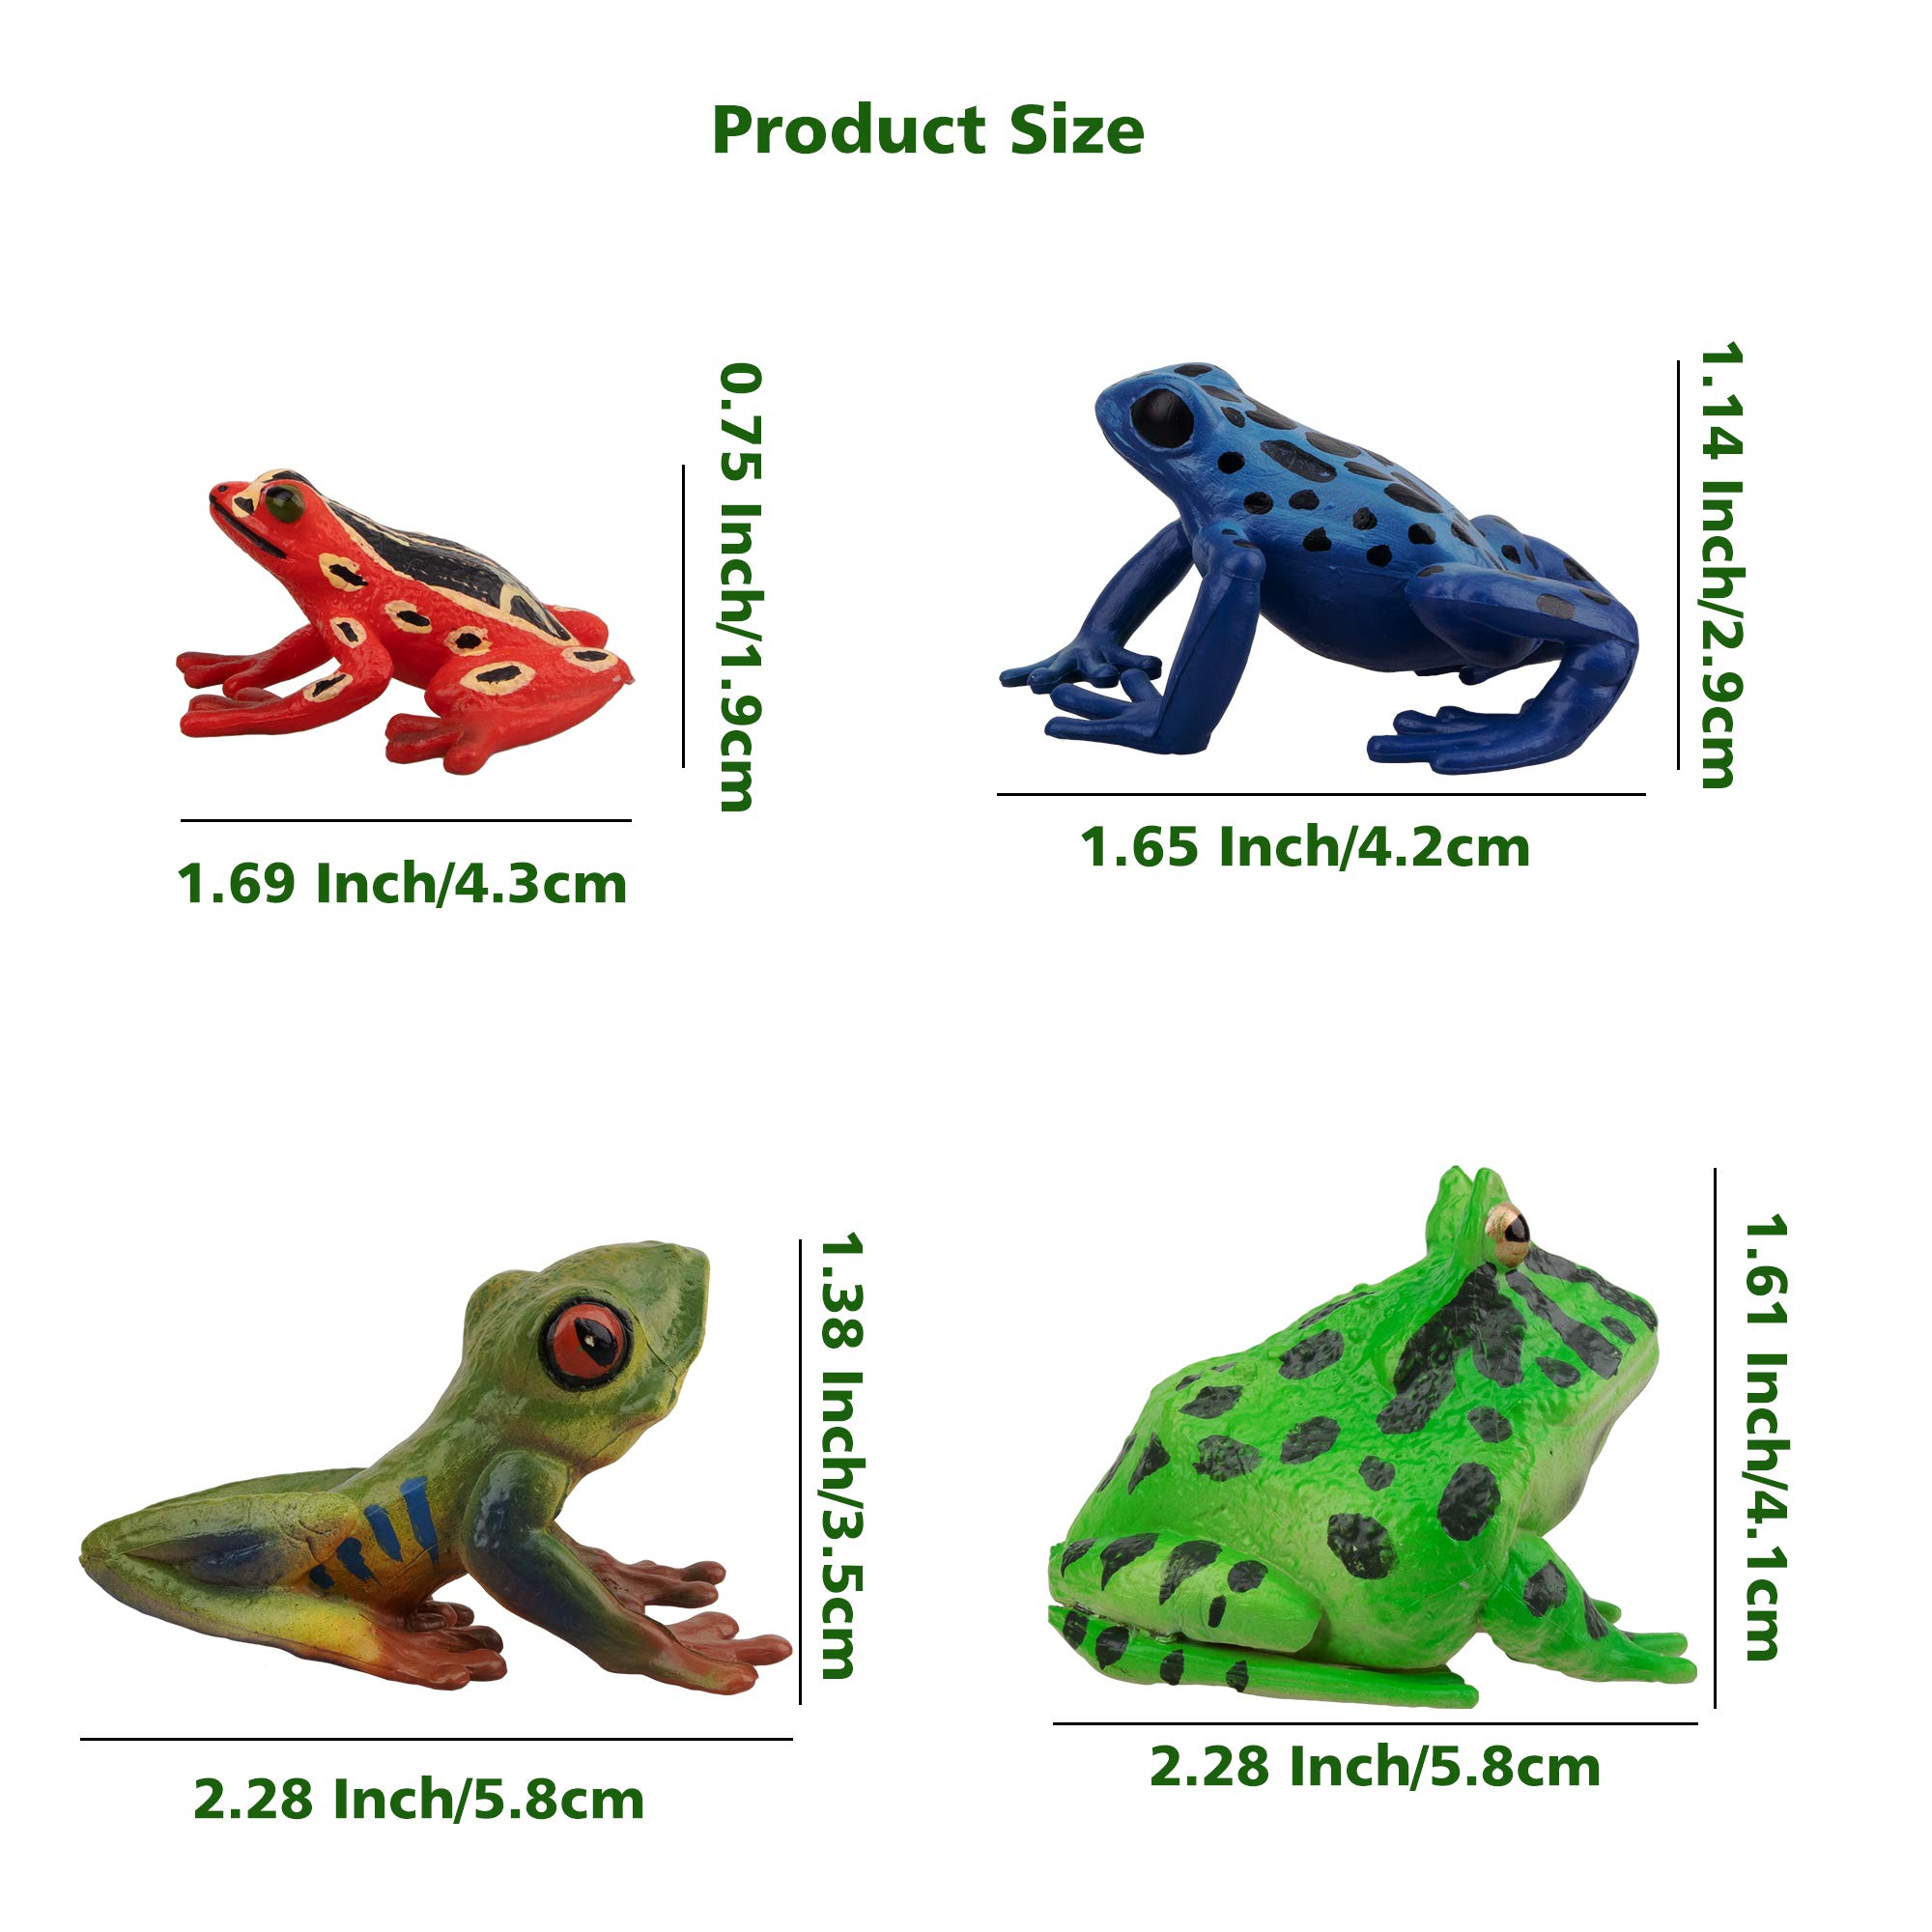 Toymany 10PCS Frog Toy Figures, Plastic Rainforest Woodland Animals Toy Frogs Set with Realistic Poison Dart Frog, Cake Topper P